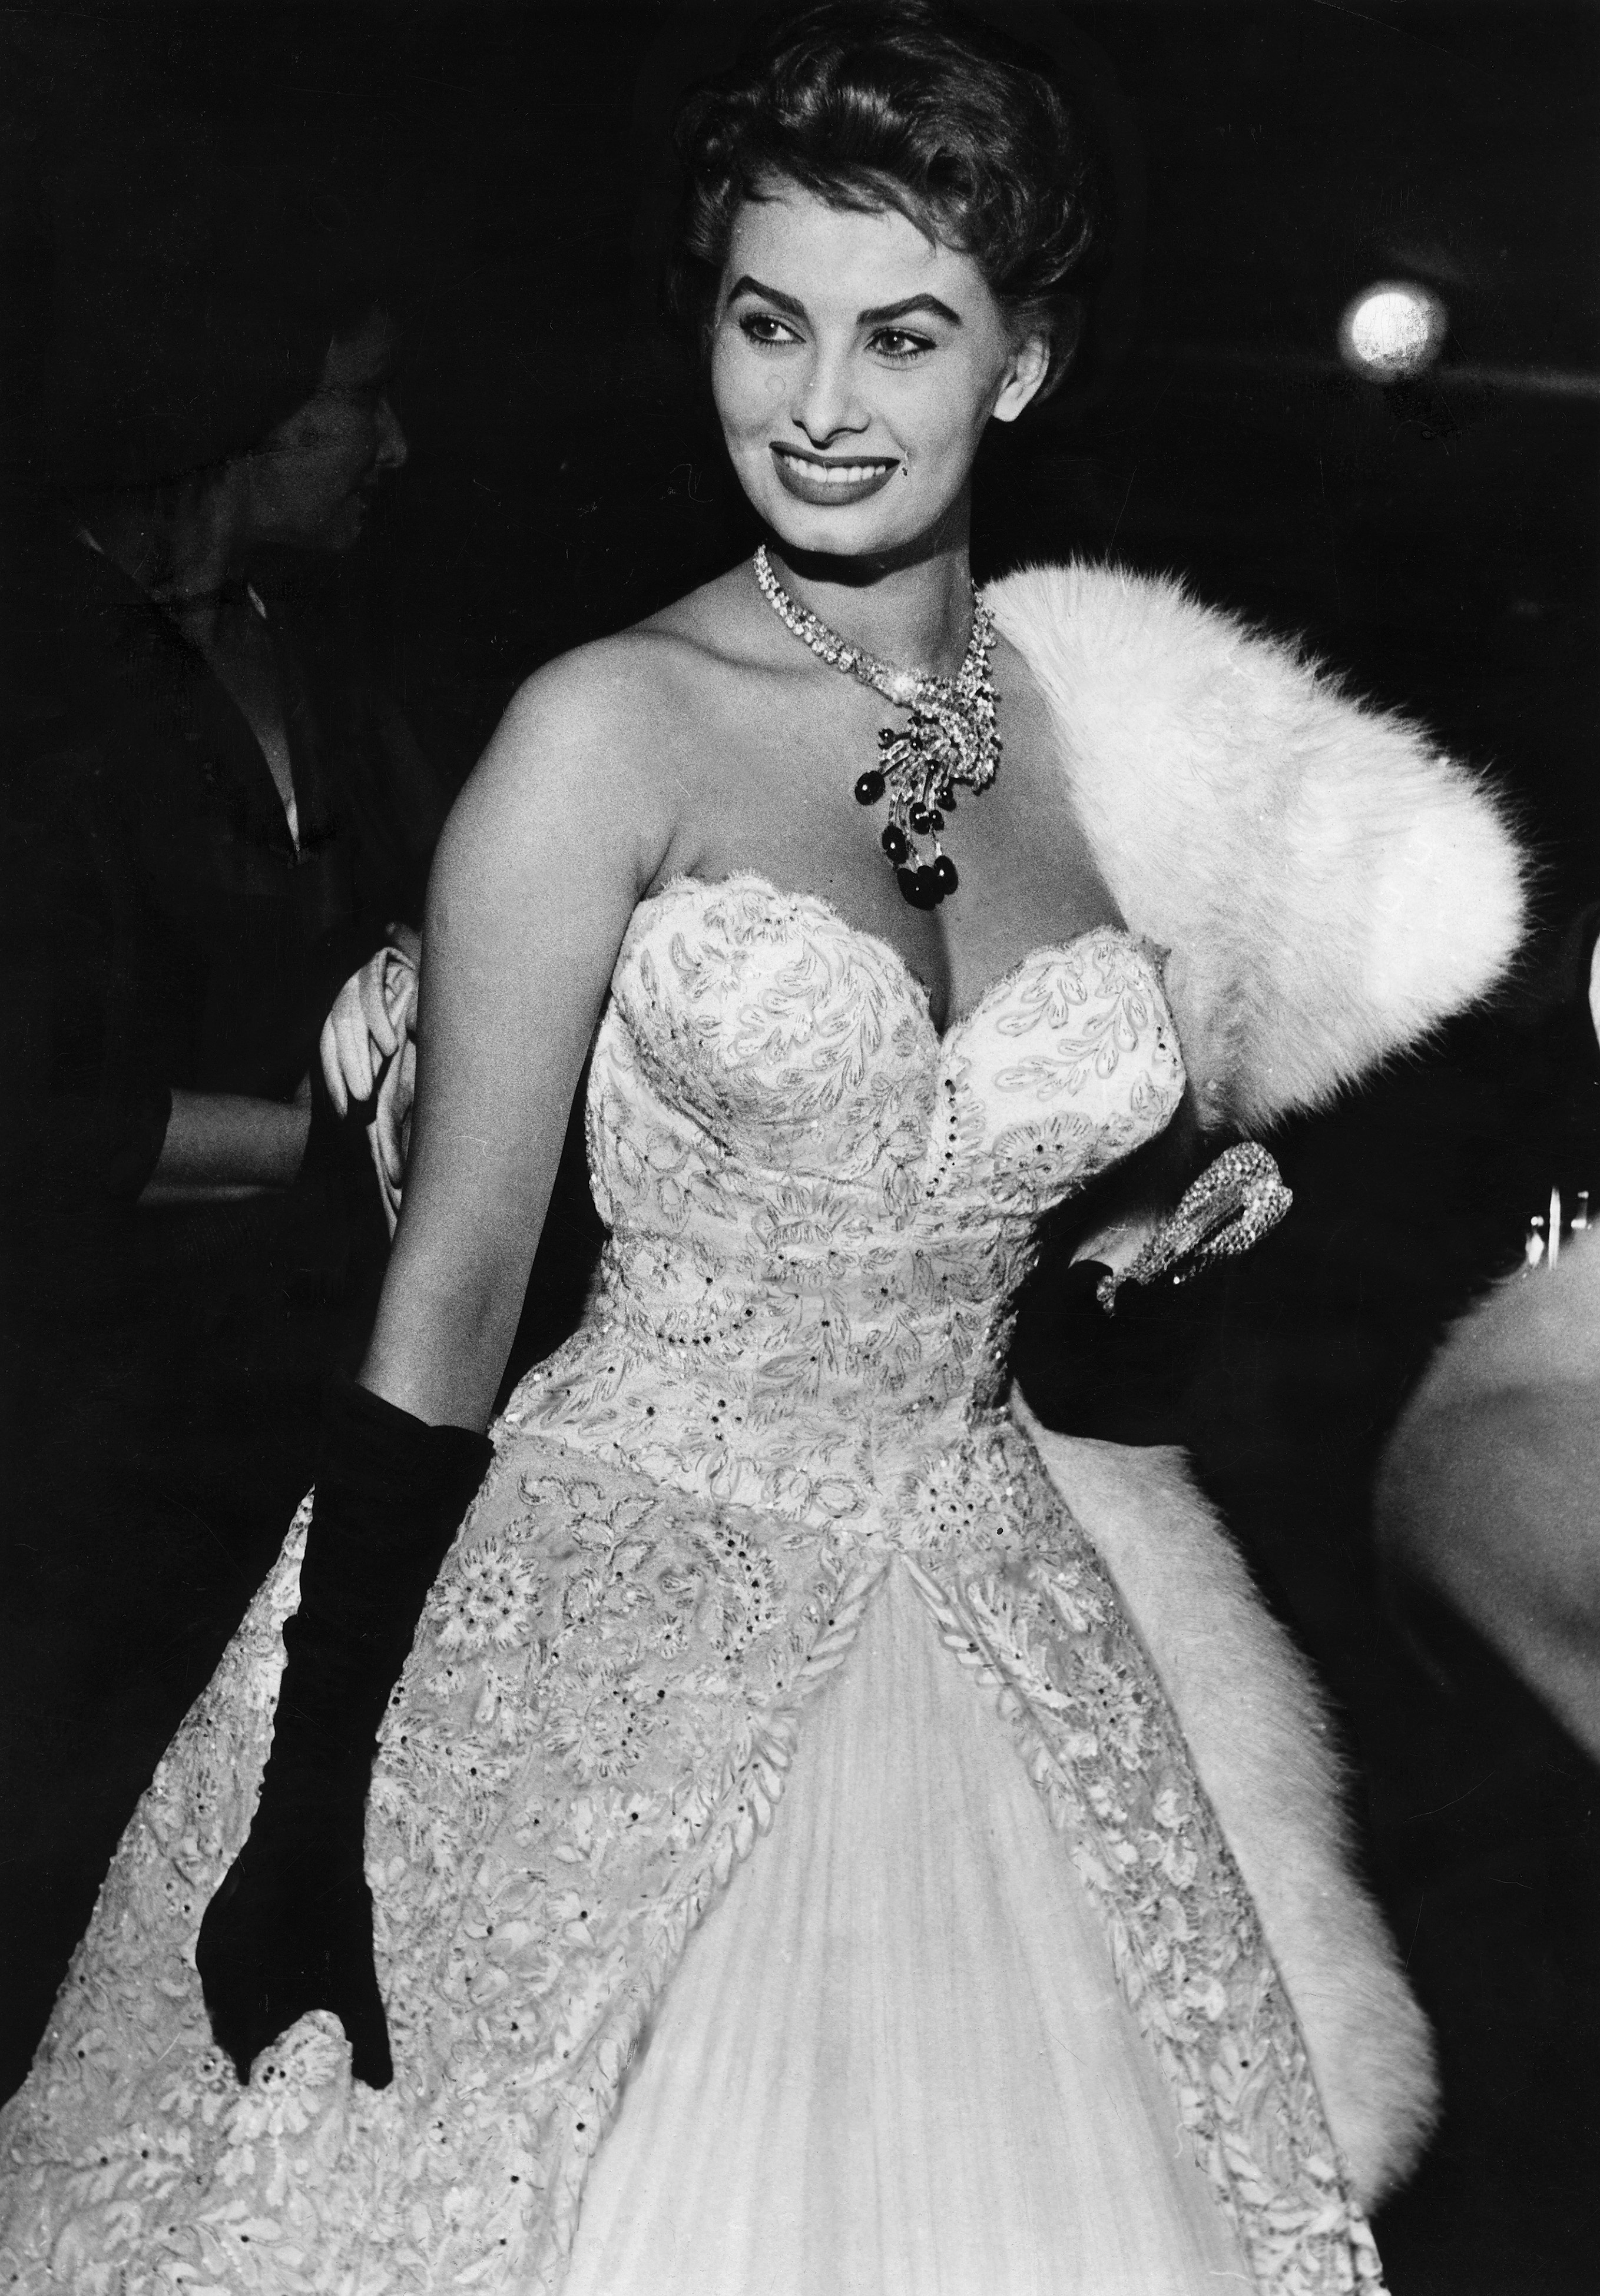 Sophia Loren wearing a strapless gown with black elbow-length gloves at theCannes Film Festival.